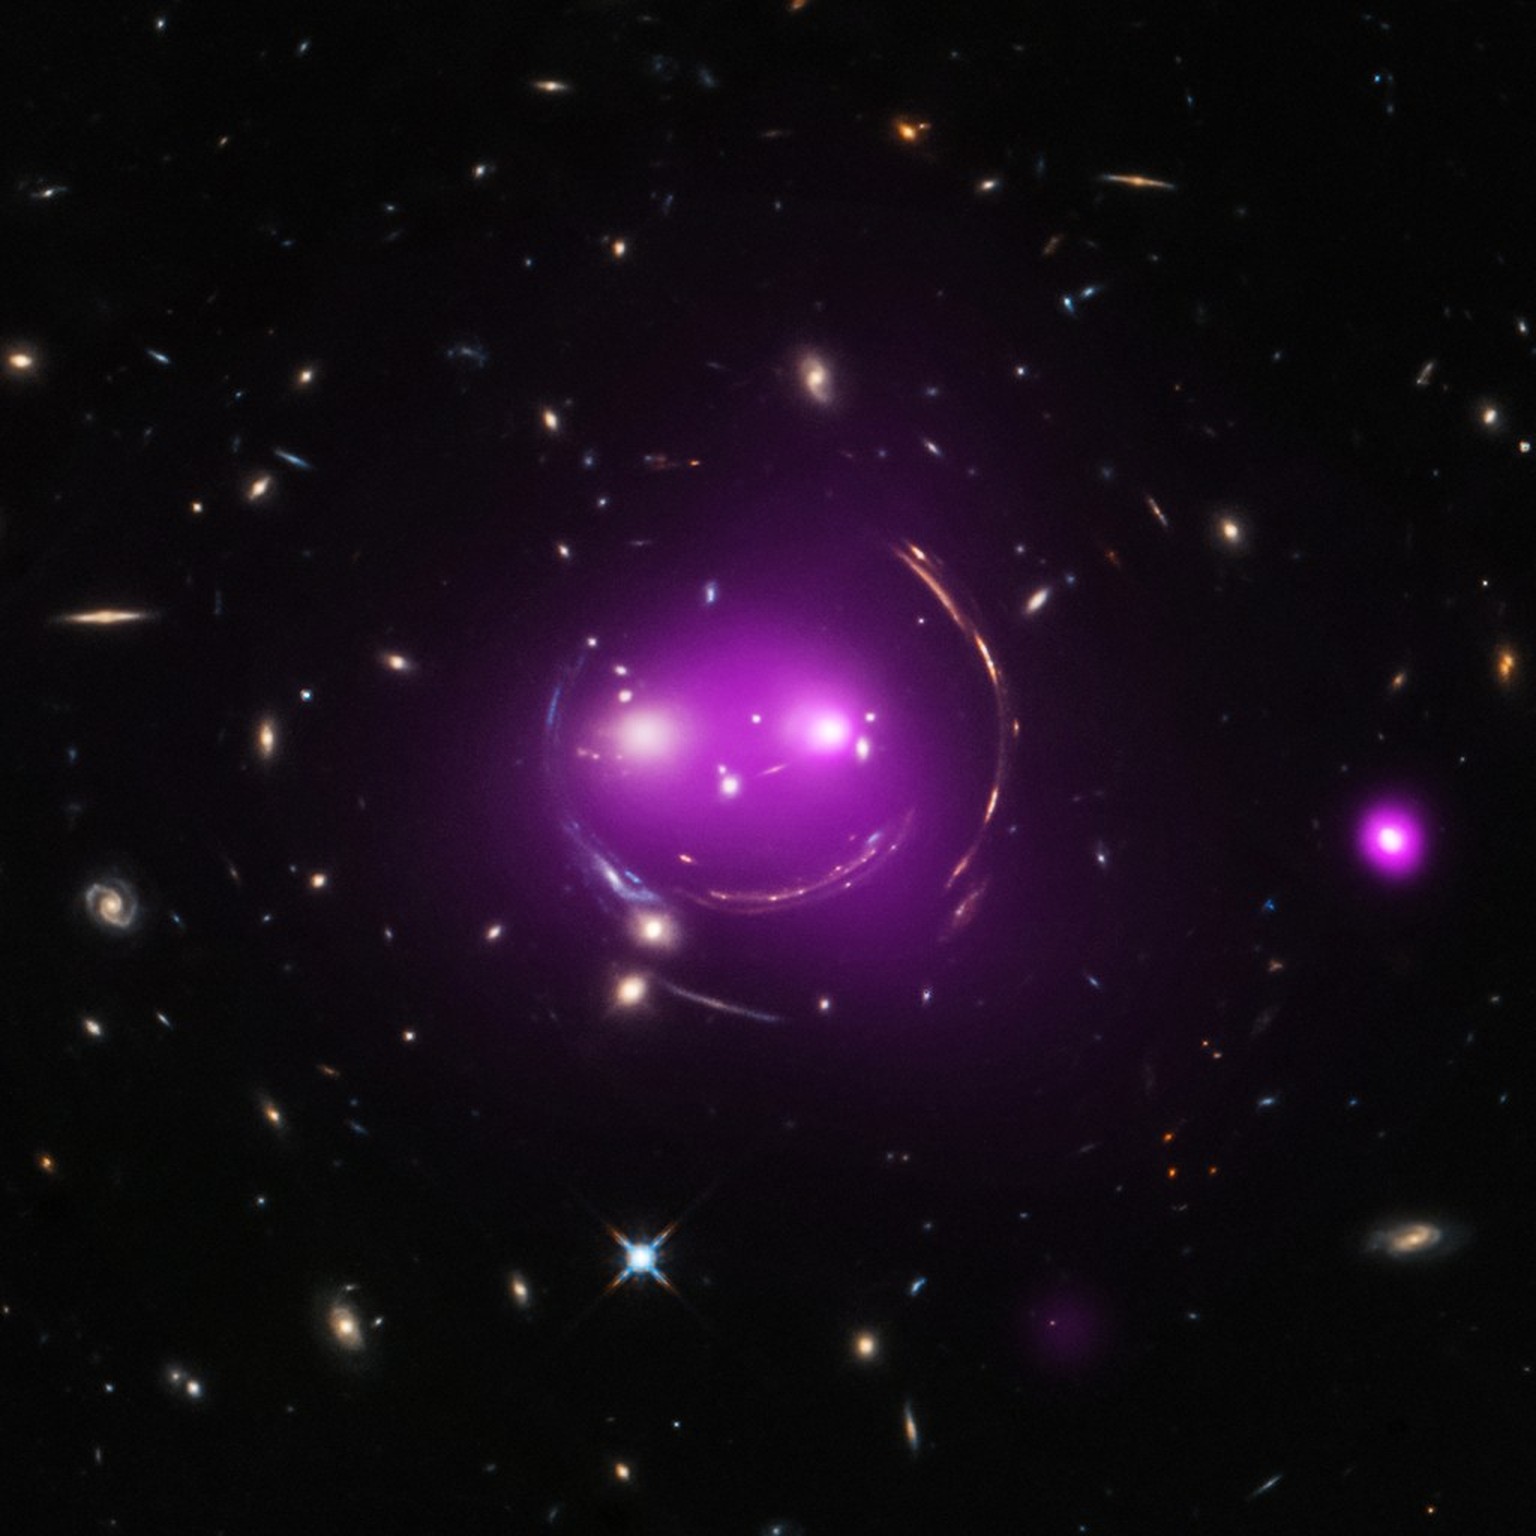 Gravity's Grin 
Albert Einstein's general theory of relativity, published over 100 years ago, predicted the phenomenon of gravitational lensing. And that's what gives these distant galaxies such a whi ...